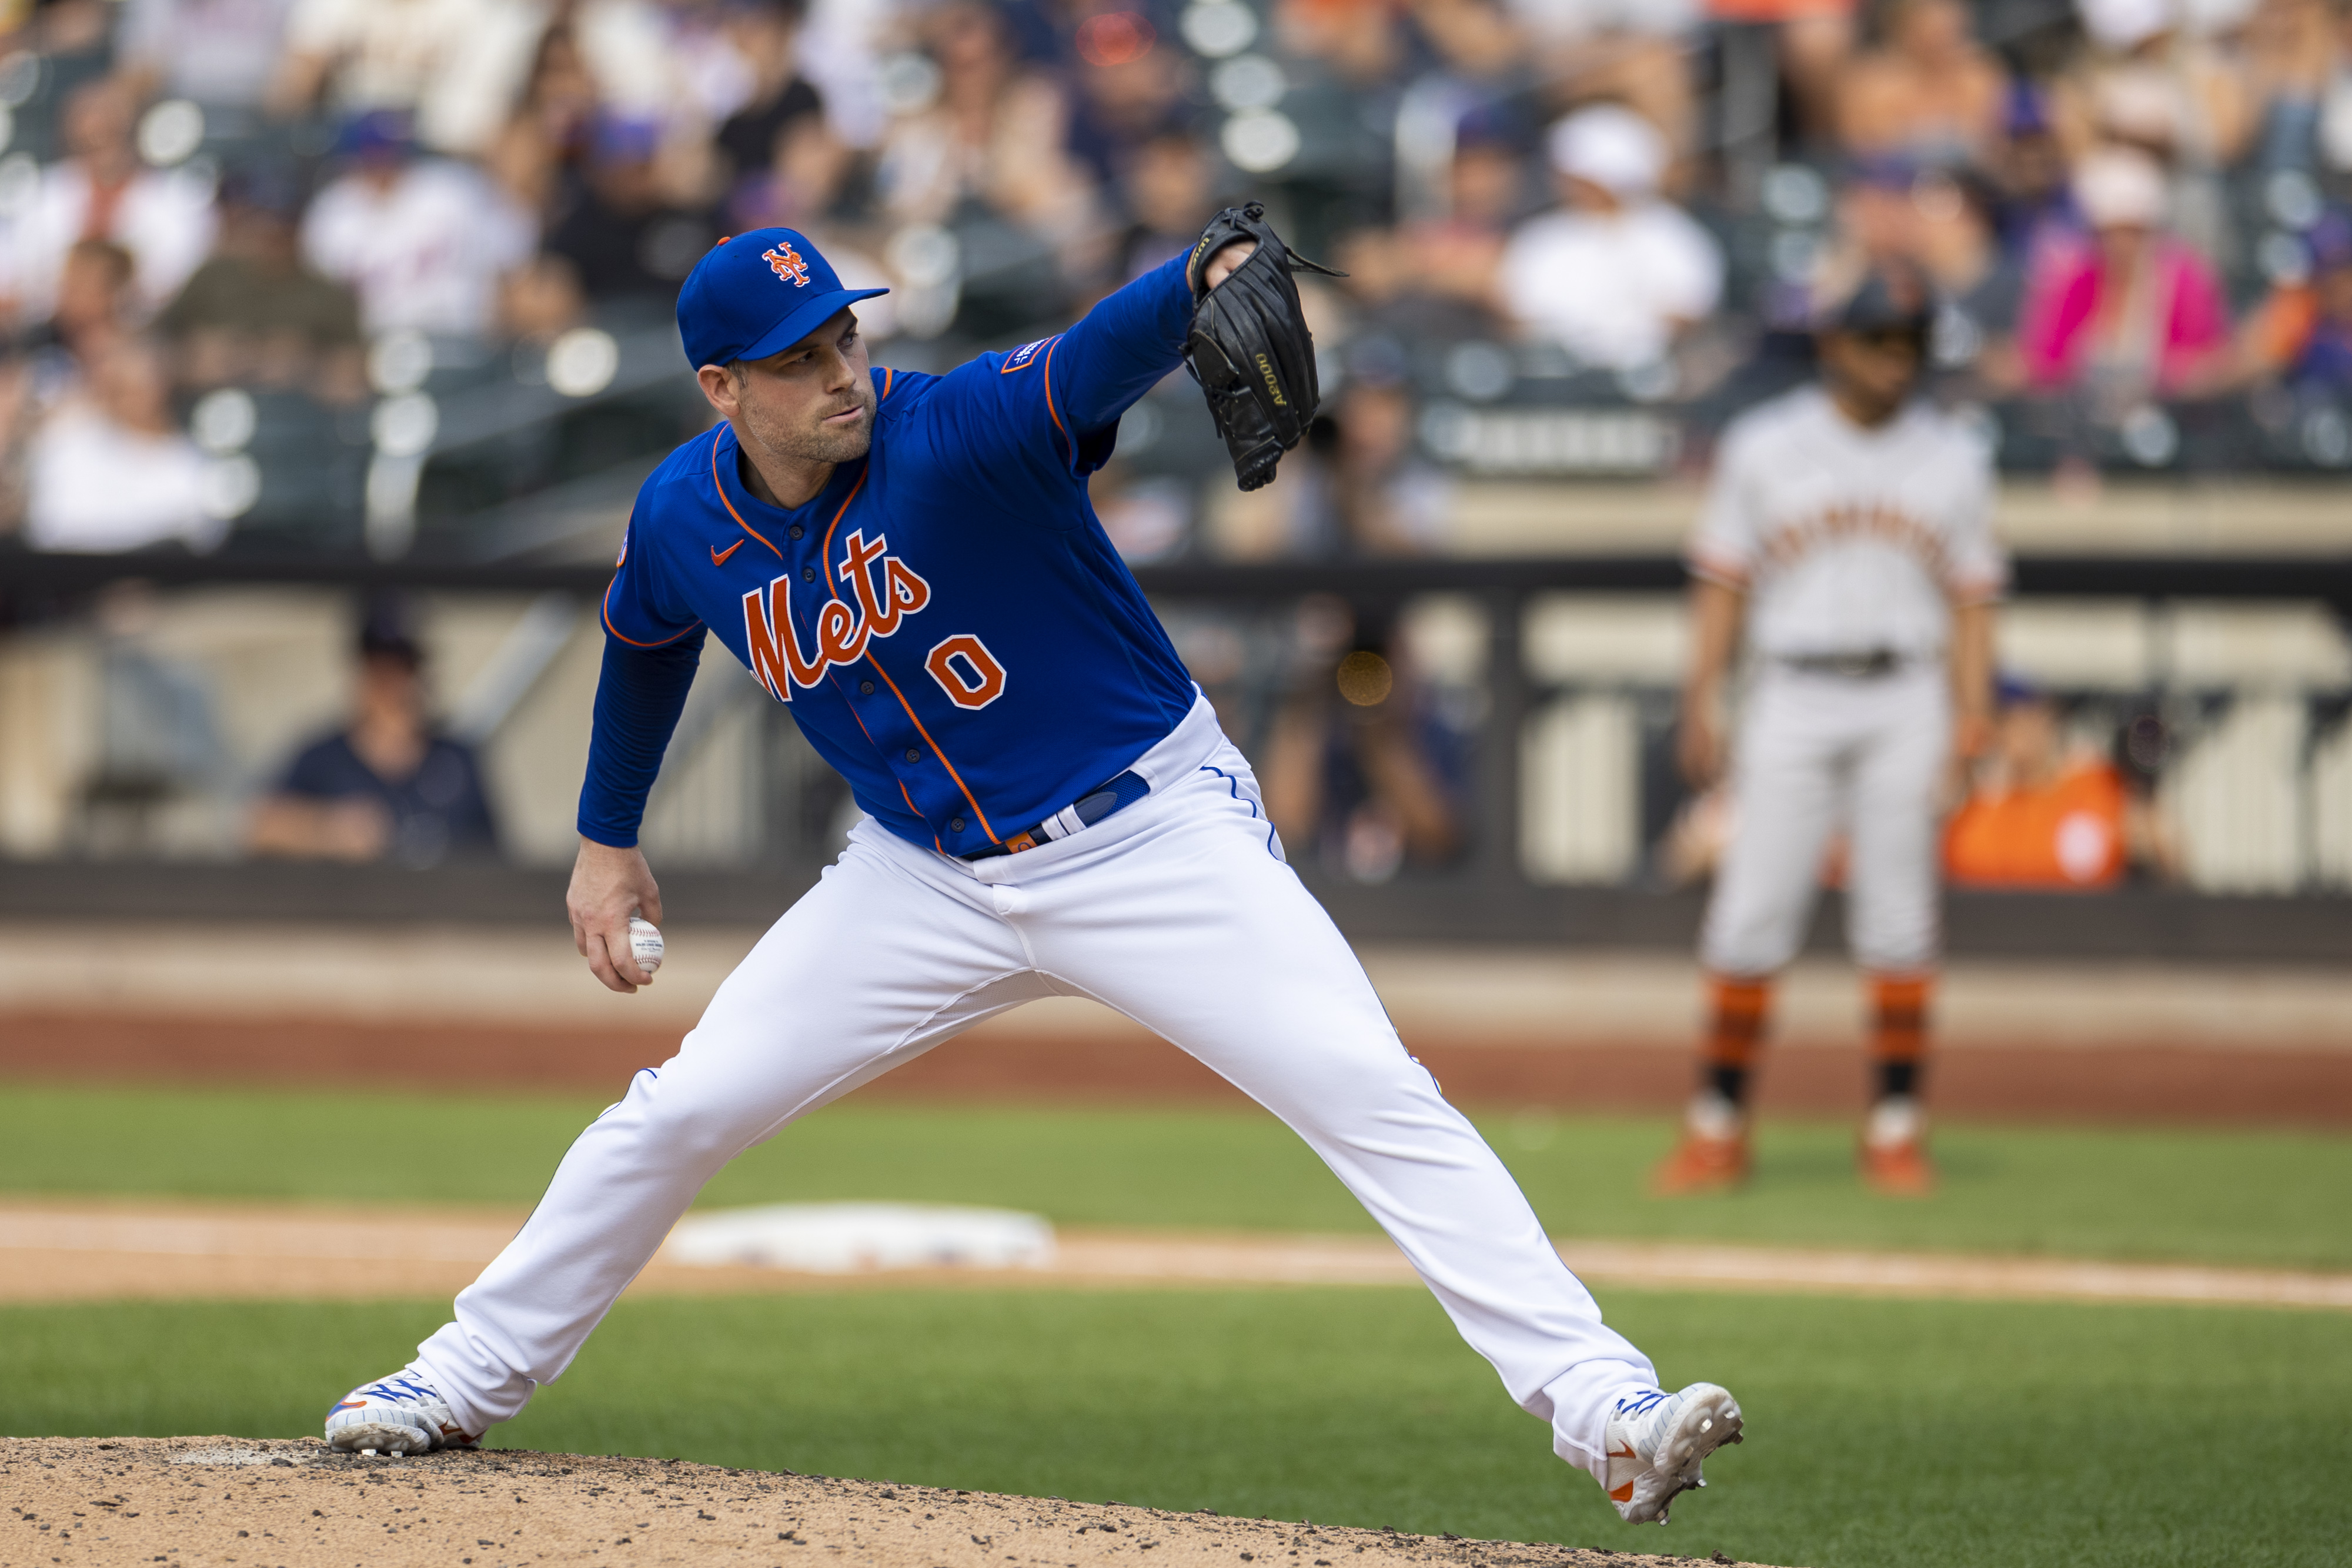 New York Mets relief pitcher Adam Ottavino throwing a ball during gameplay against the San Francisco Giants at Citi Field, Queens, NY.